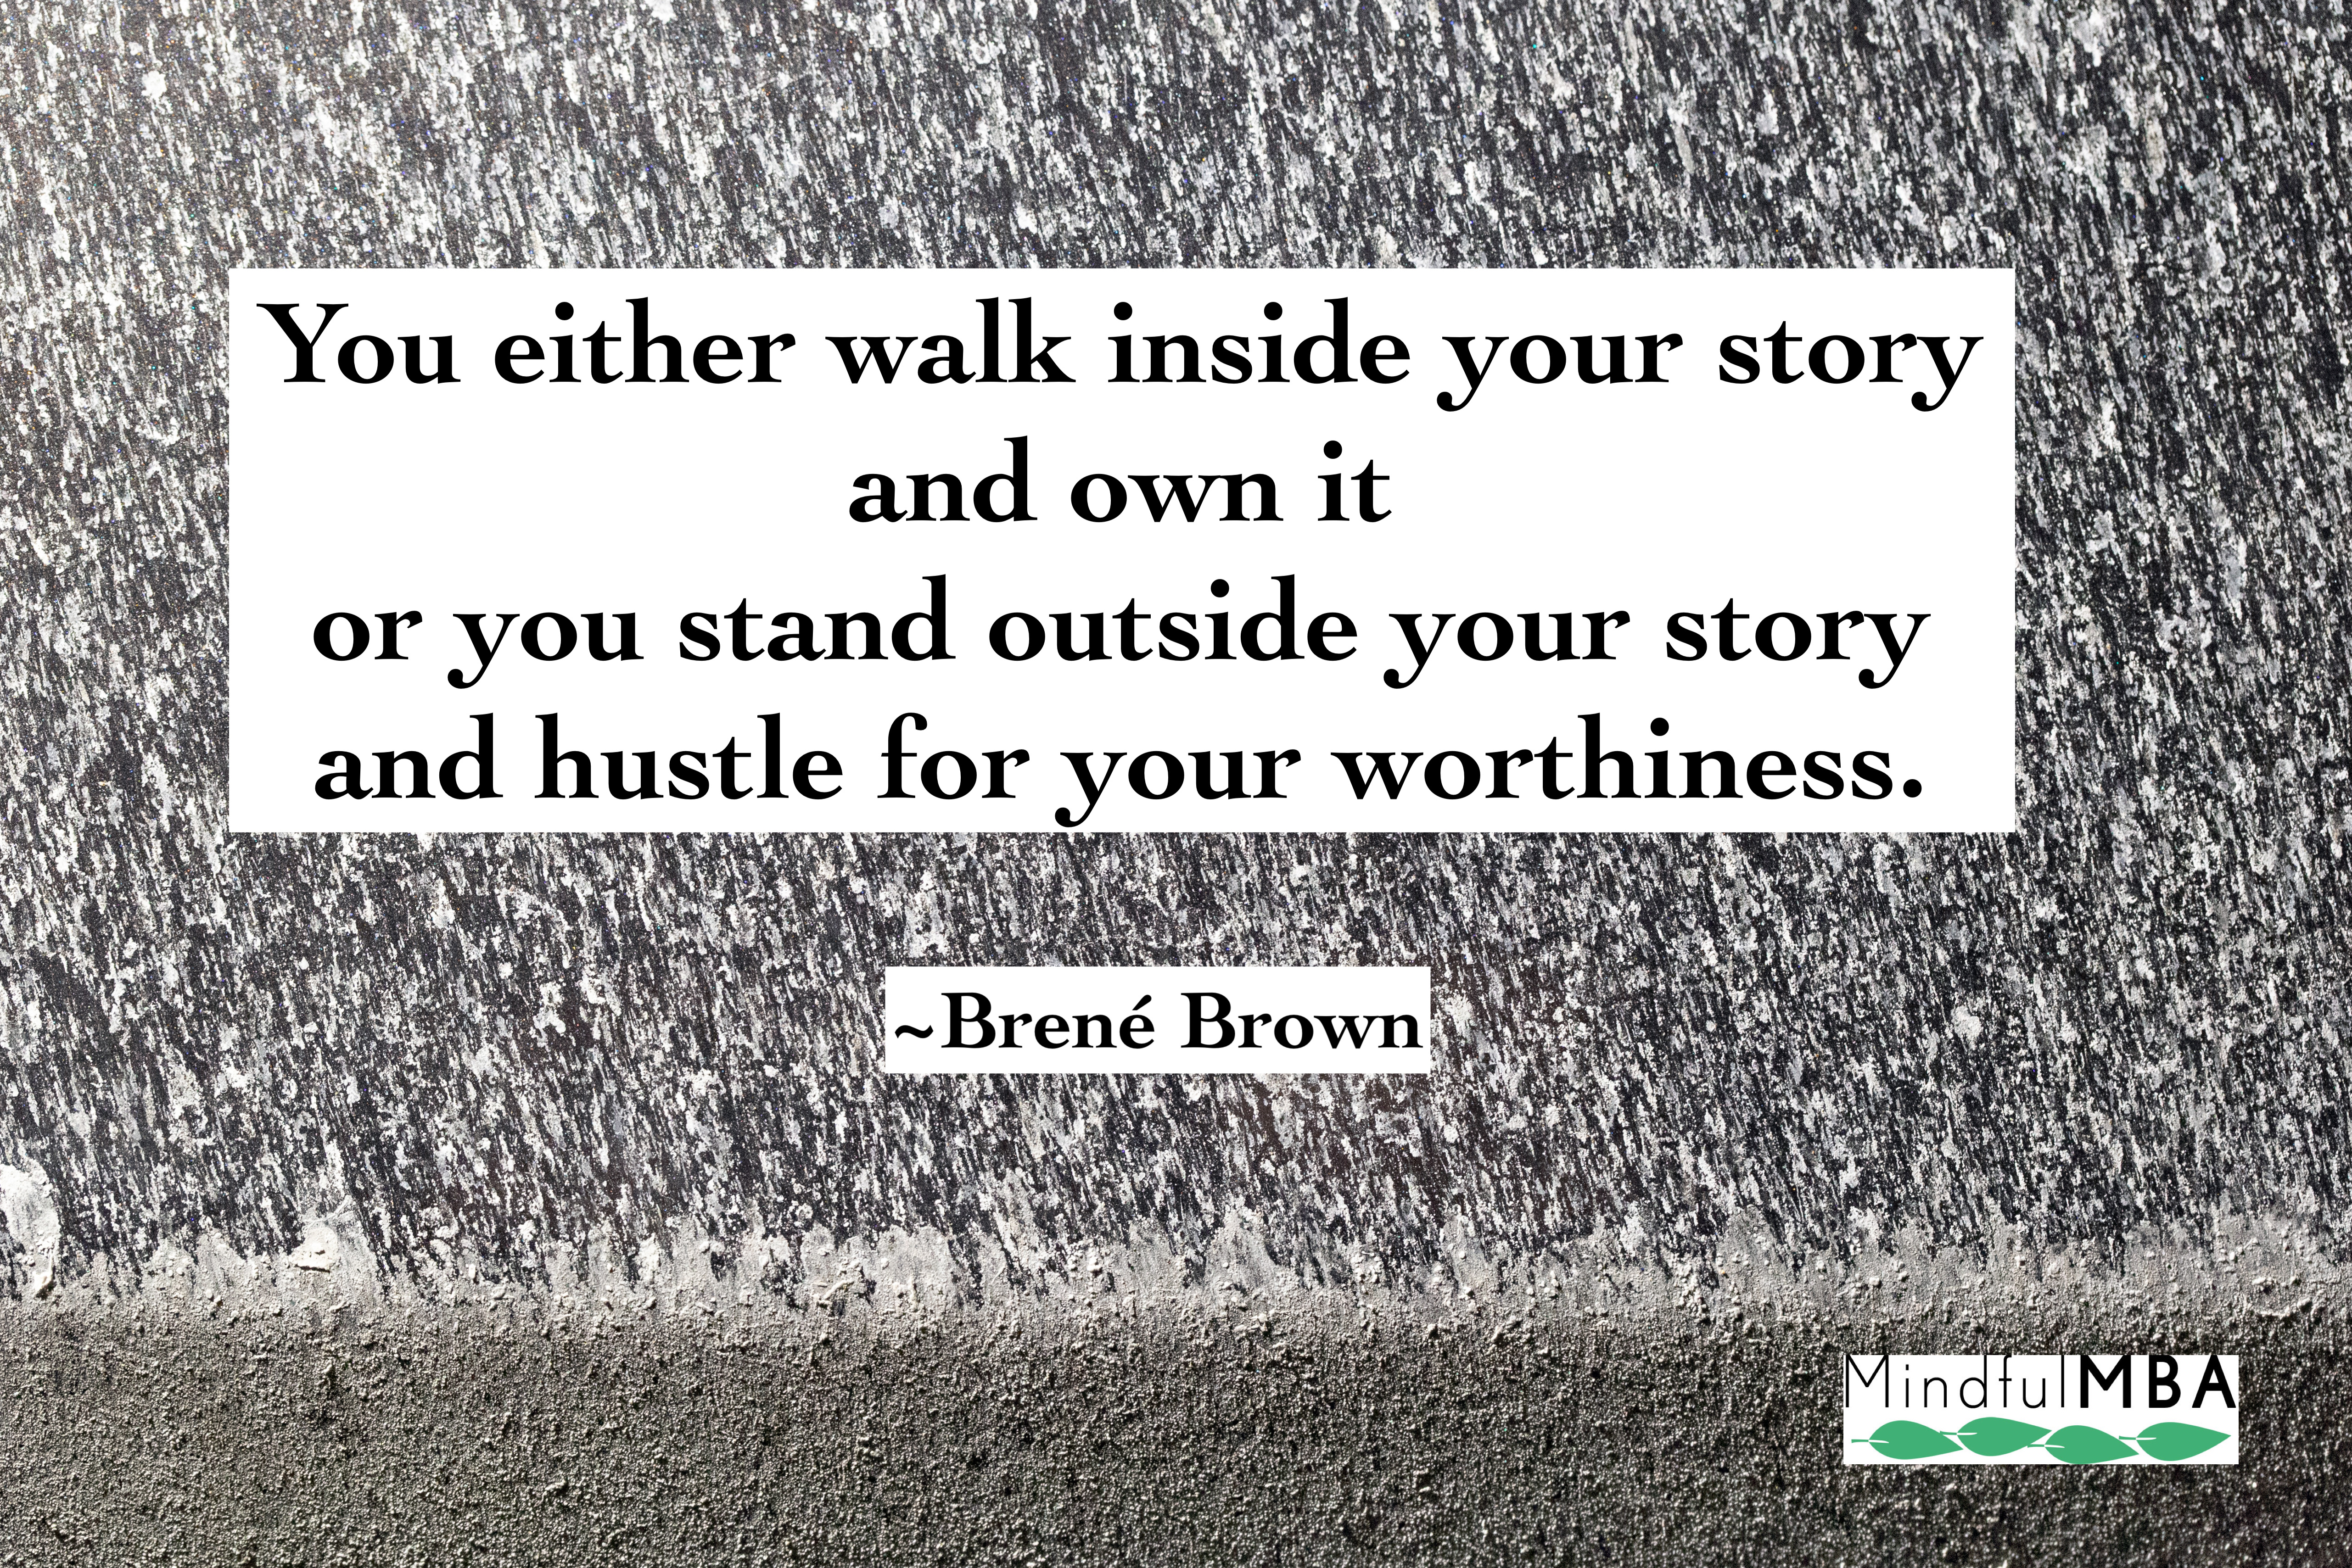 Brene Brown_Story quote w logo